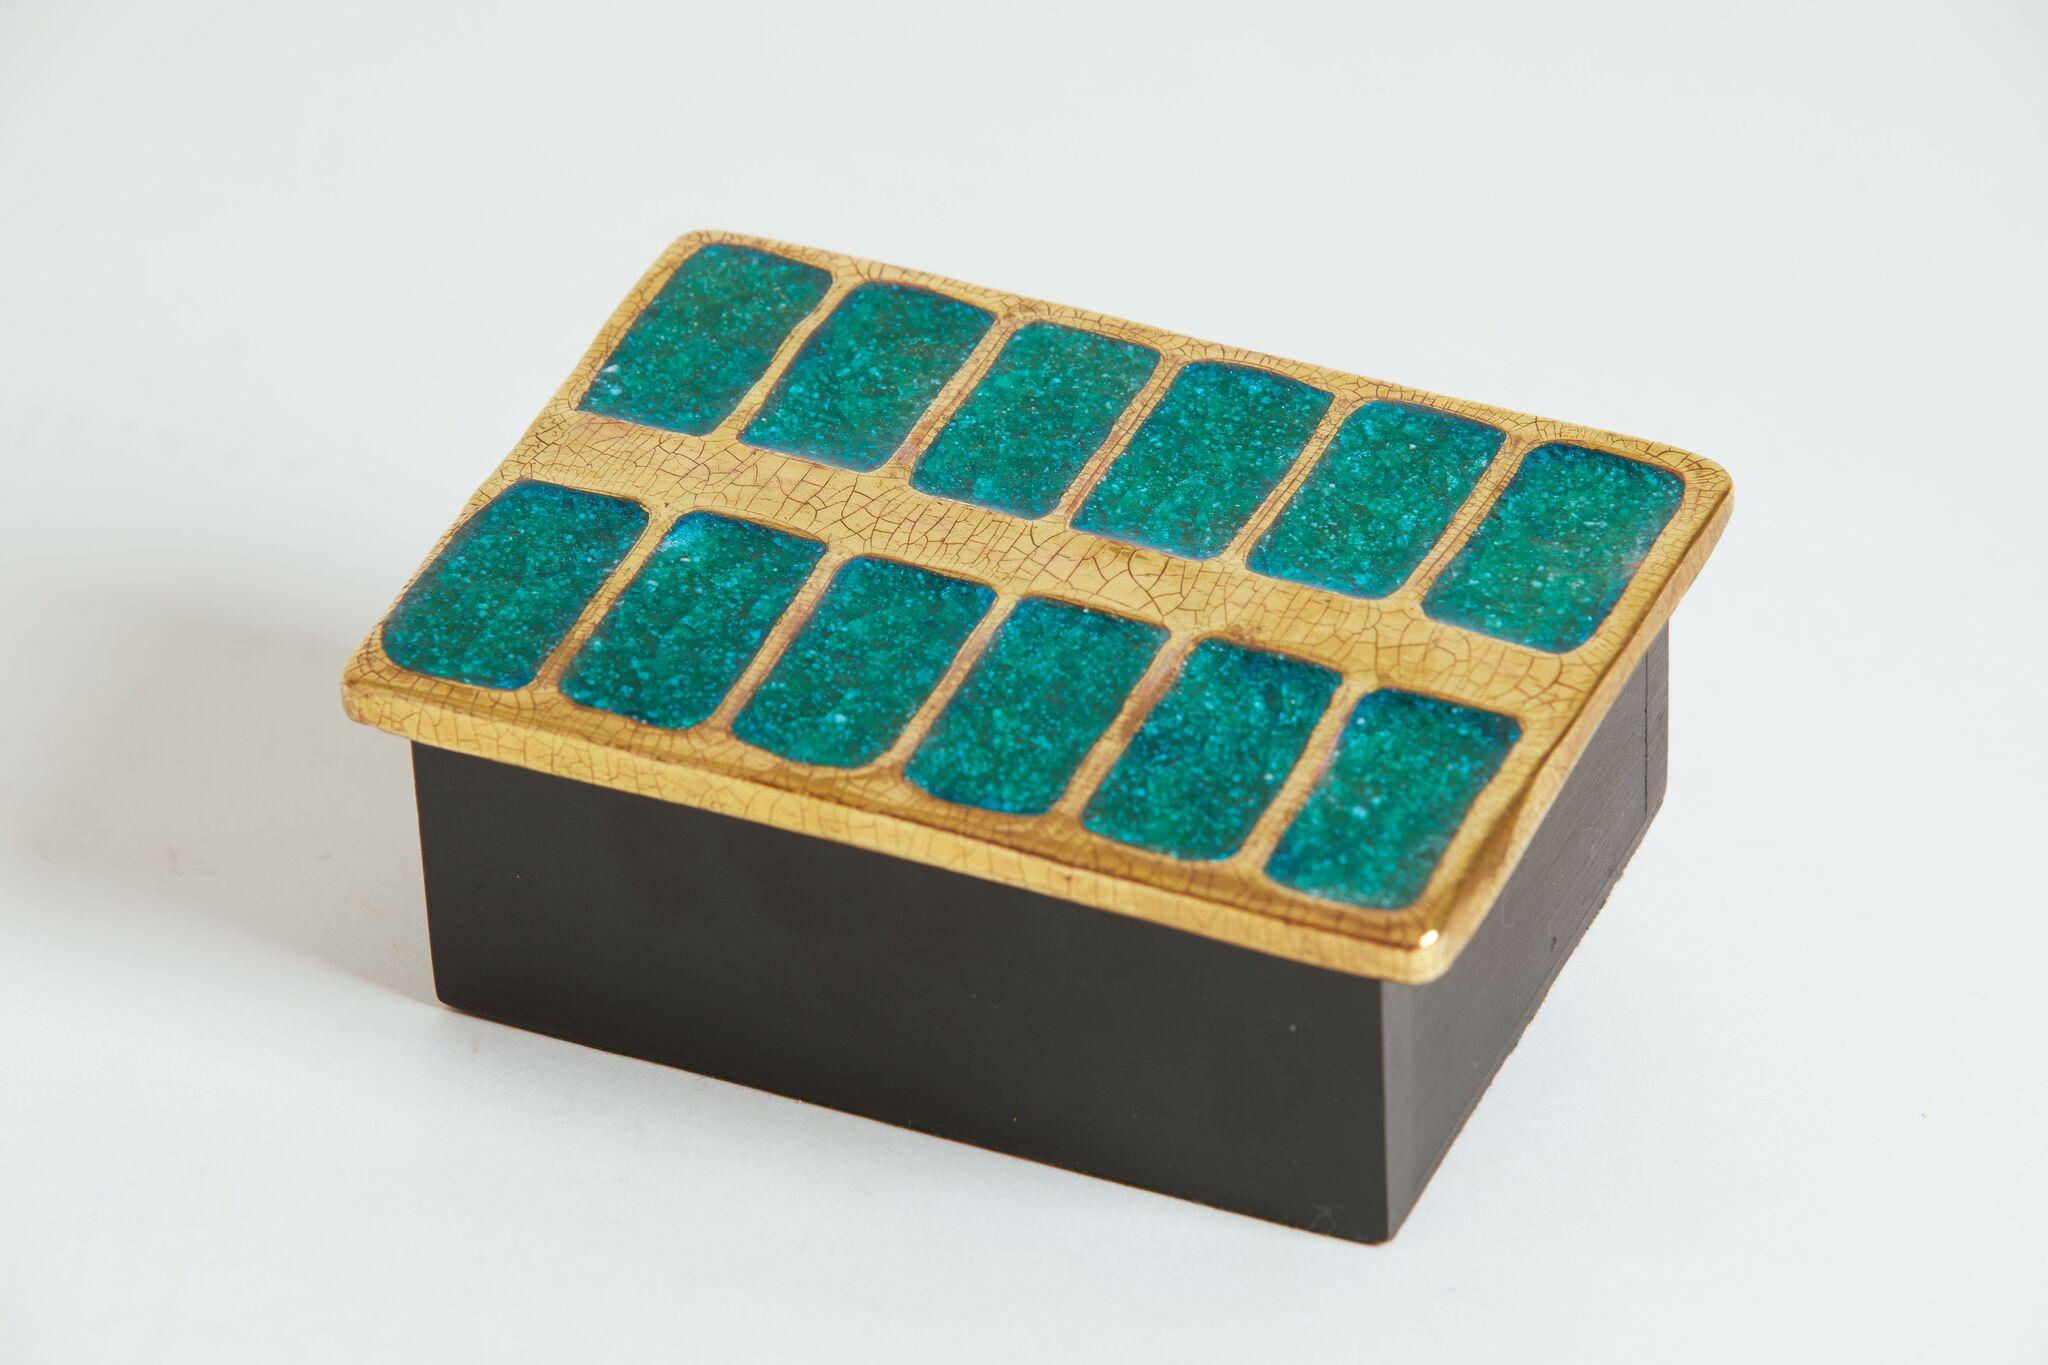 1970s French Francois Lembo box with green glass inlay and gold borders.